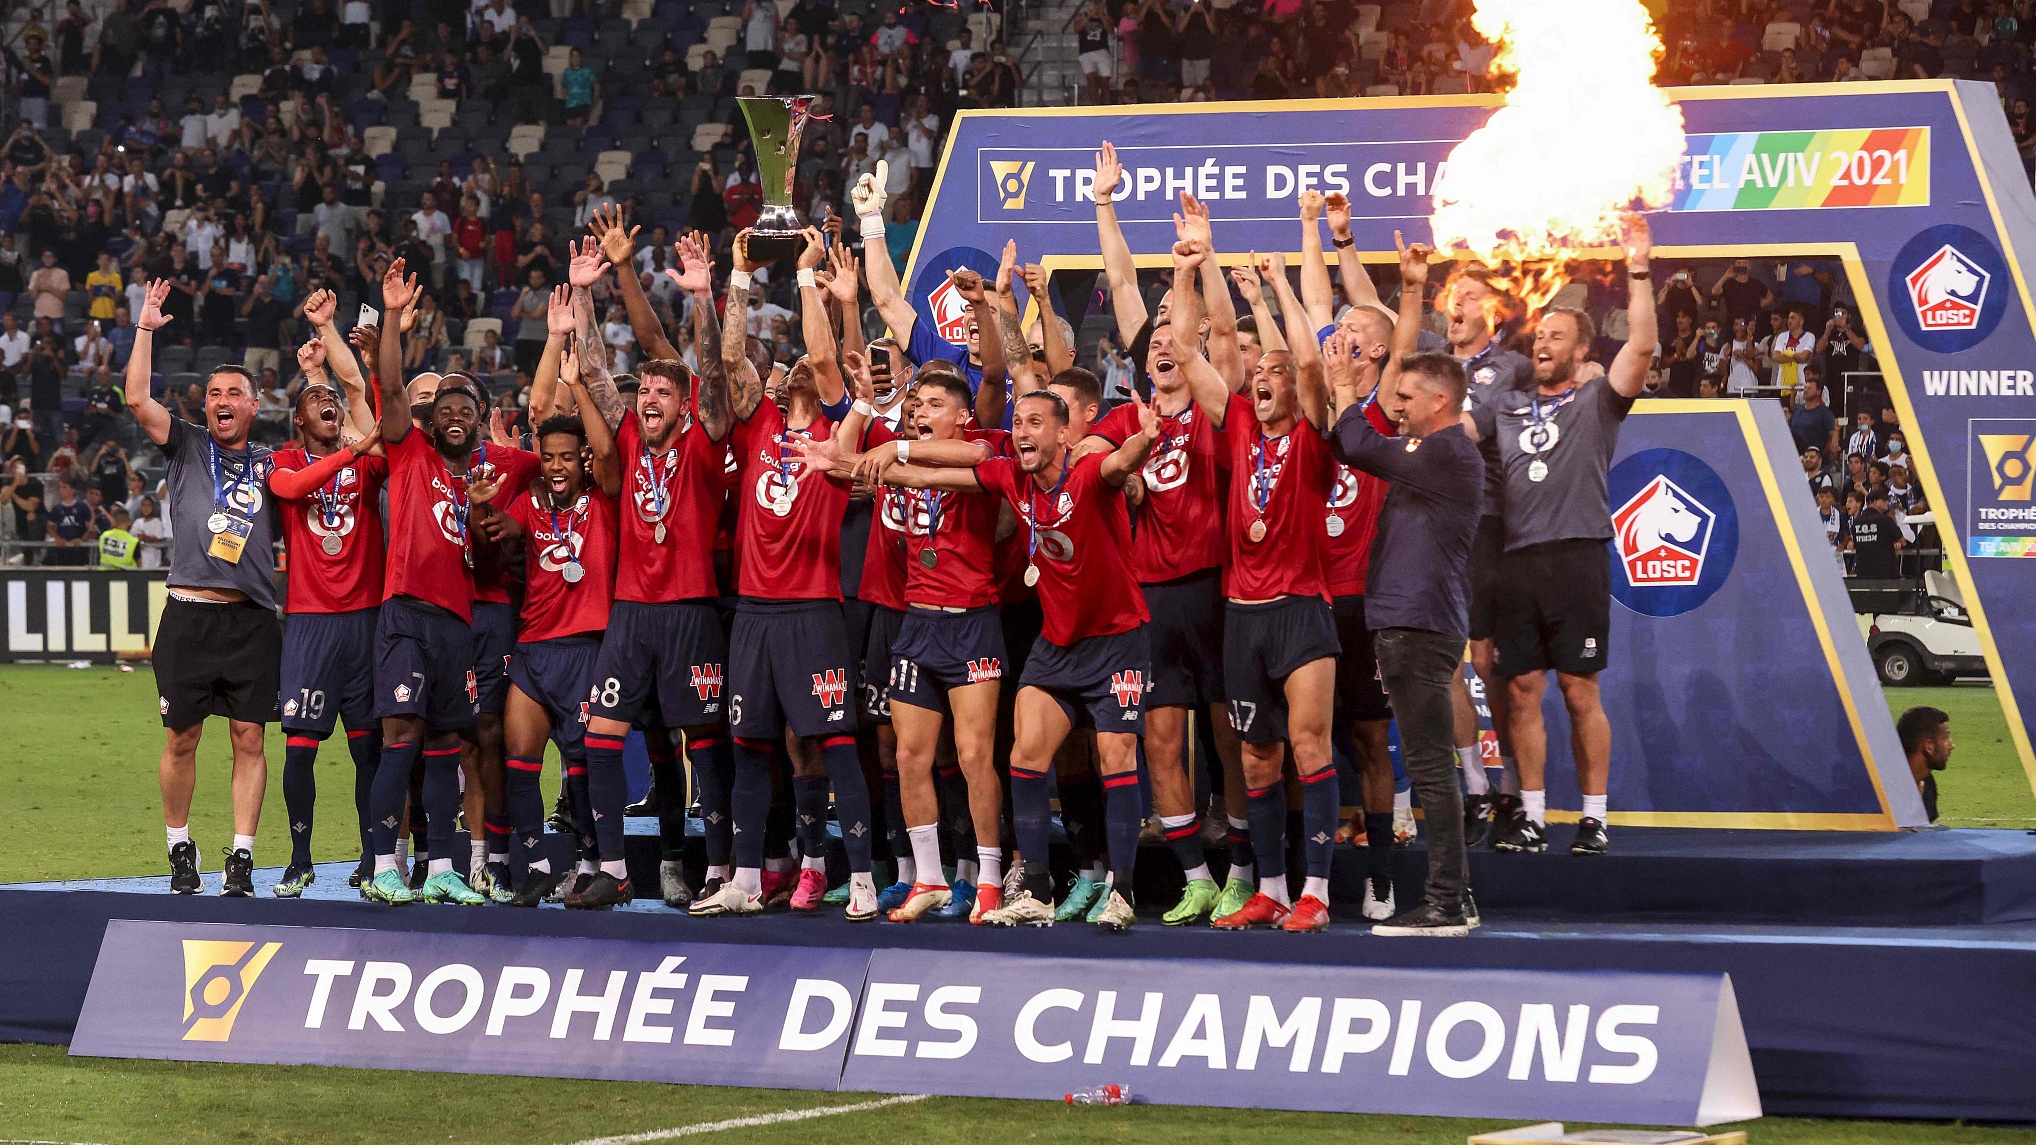 Lille beat ParisSaint Germain to clinch first French Super Cup CGTN